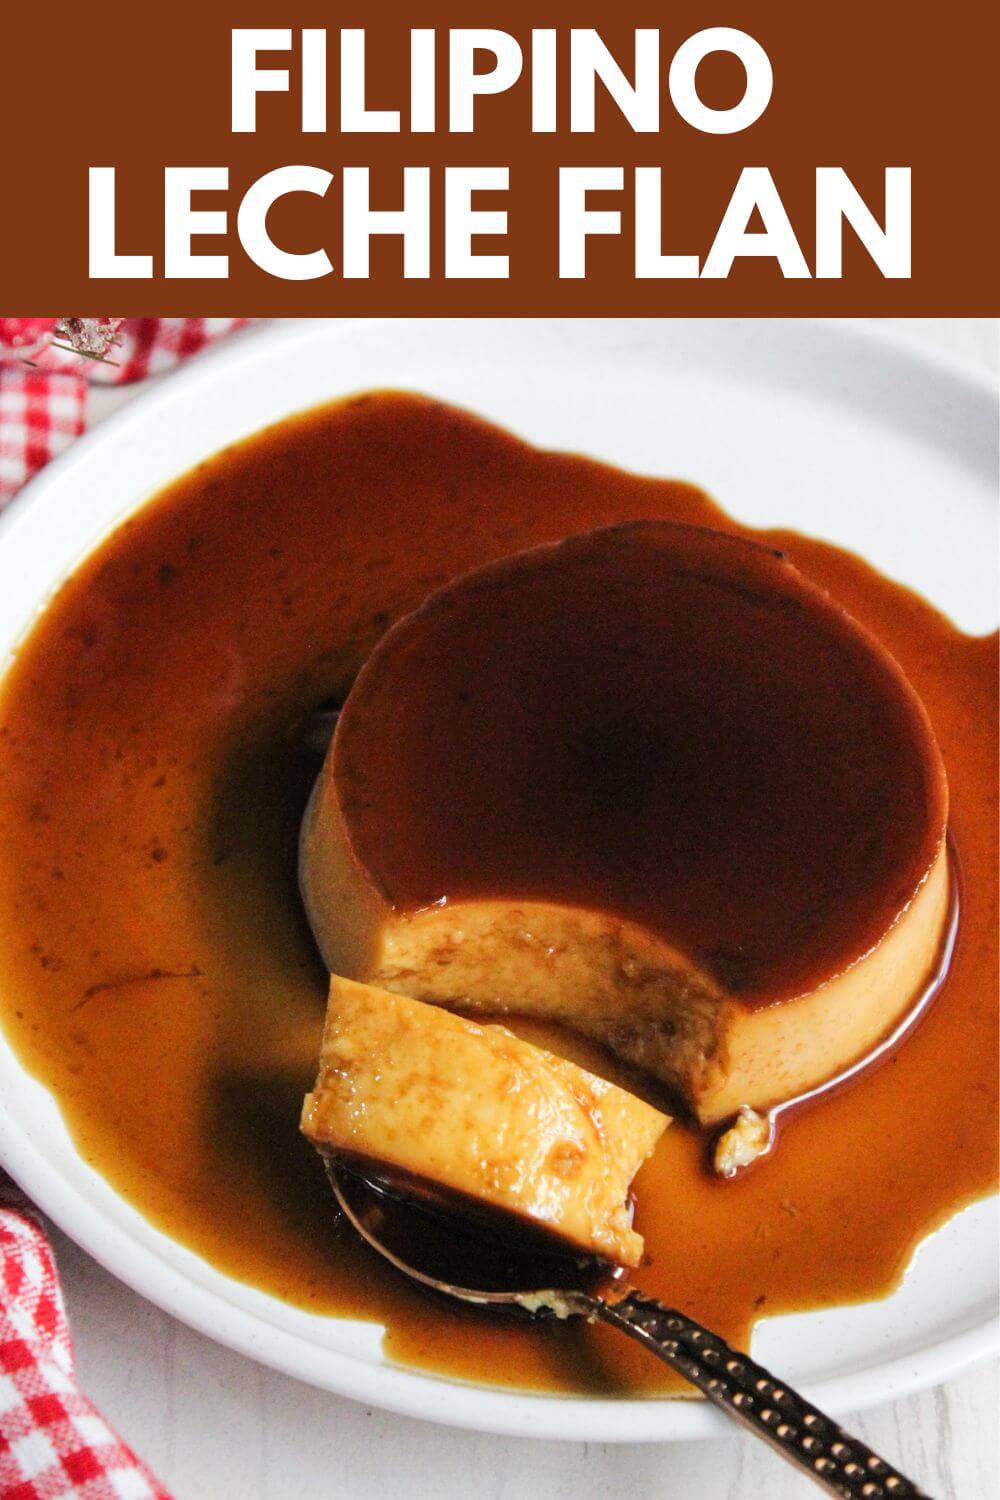 Filipino leche flan elegantly plated with a spoon.